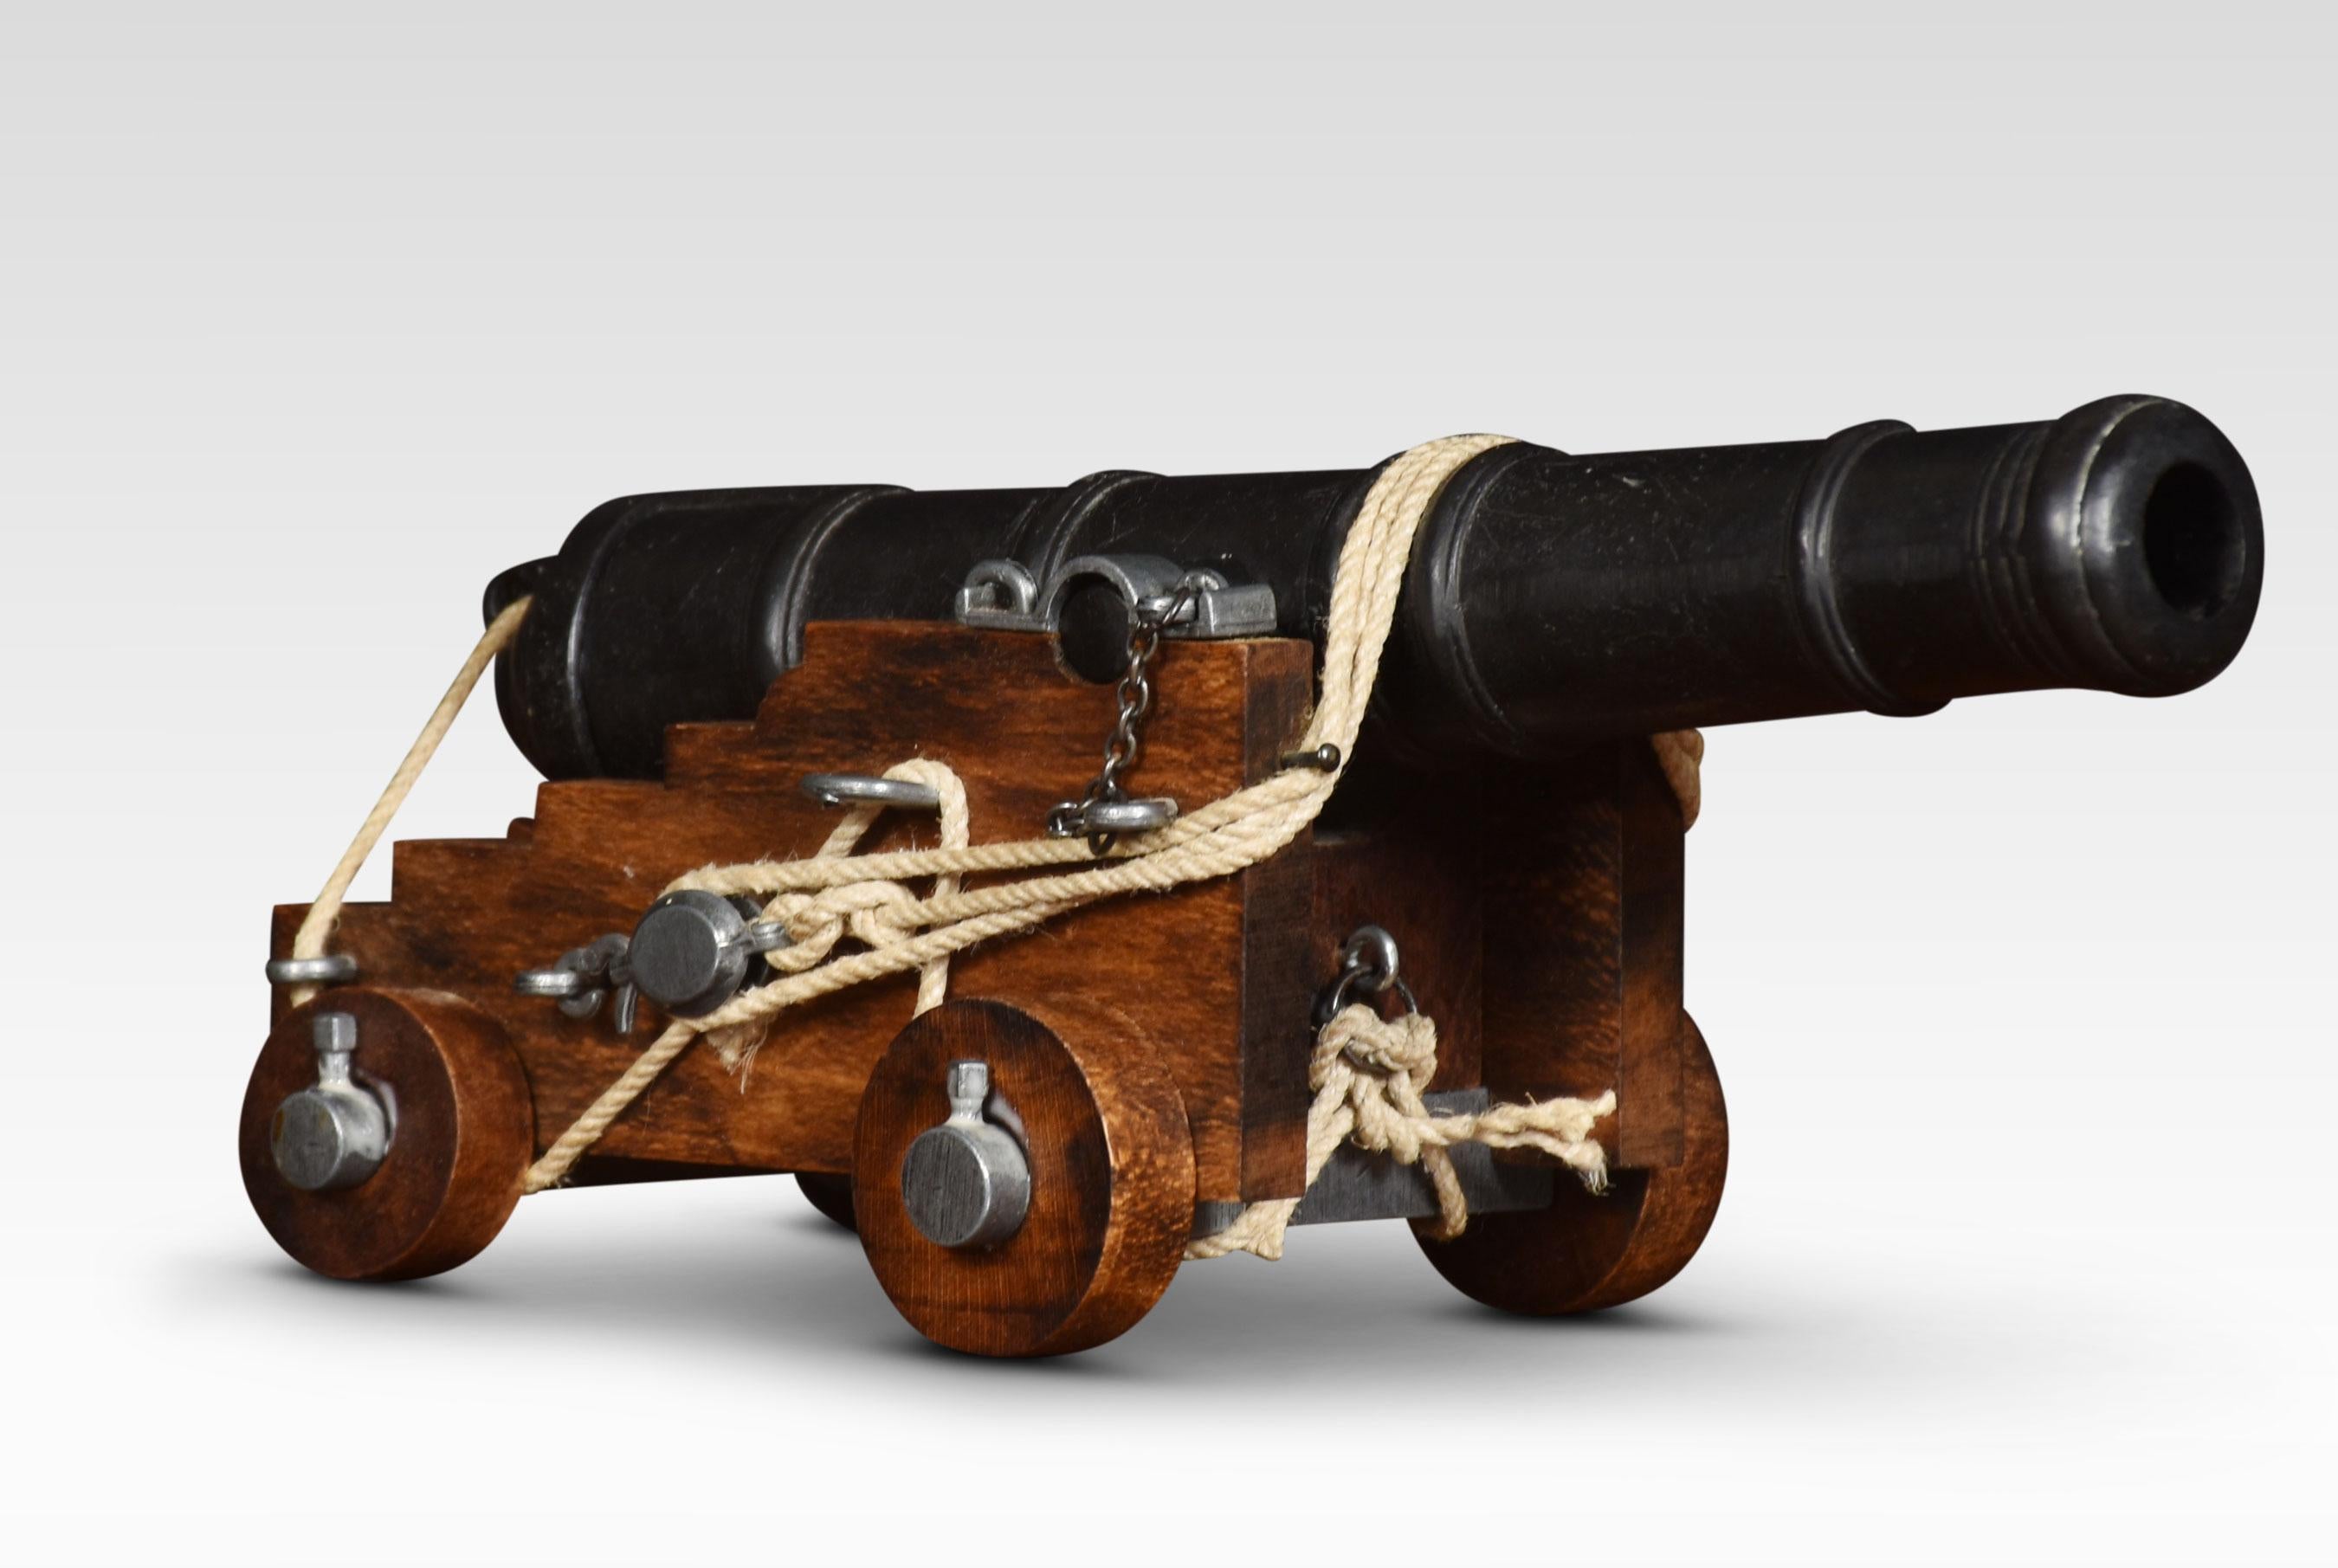 Desktop model of a cannon having cast-iron barrel on later oak carriage with working wheels.
Dimensions
Height 5 inches
Width 5 inches
Depth 10.5 inches.